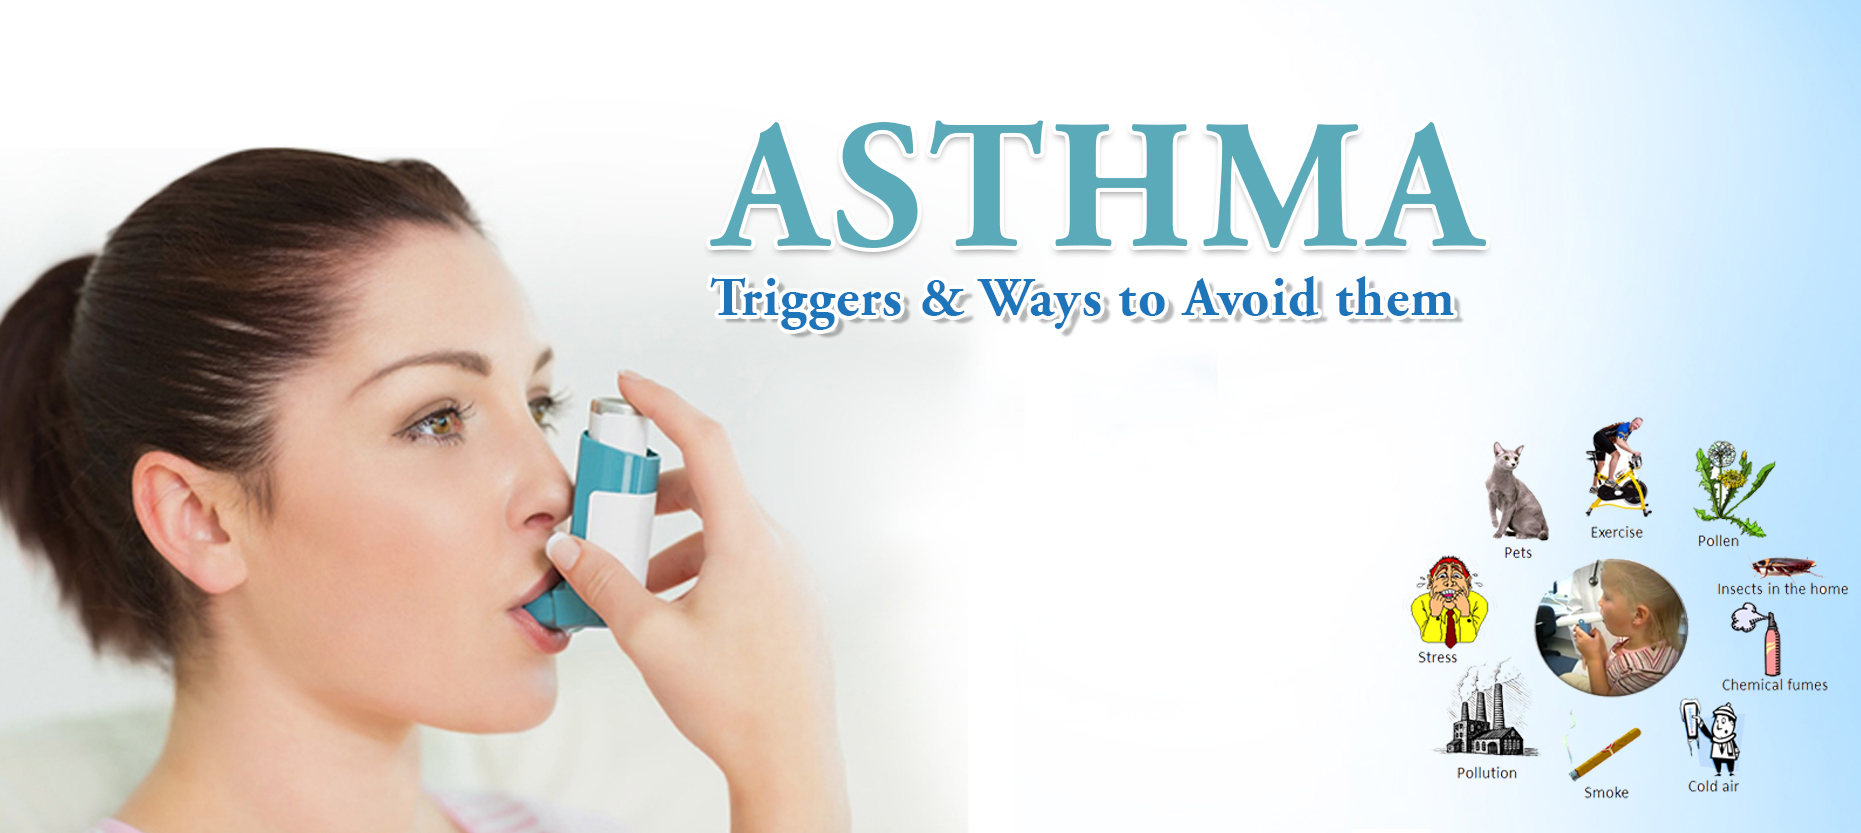 10 Most Common Triggers of Asthma & How to Avoid Them